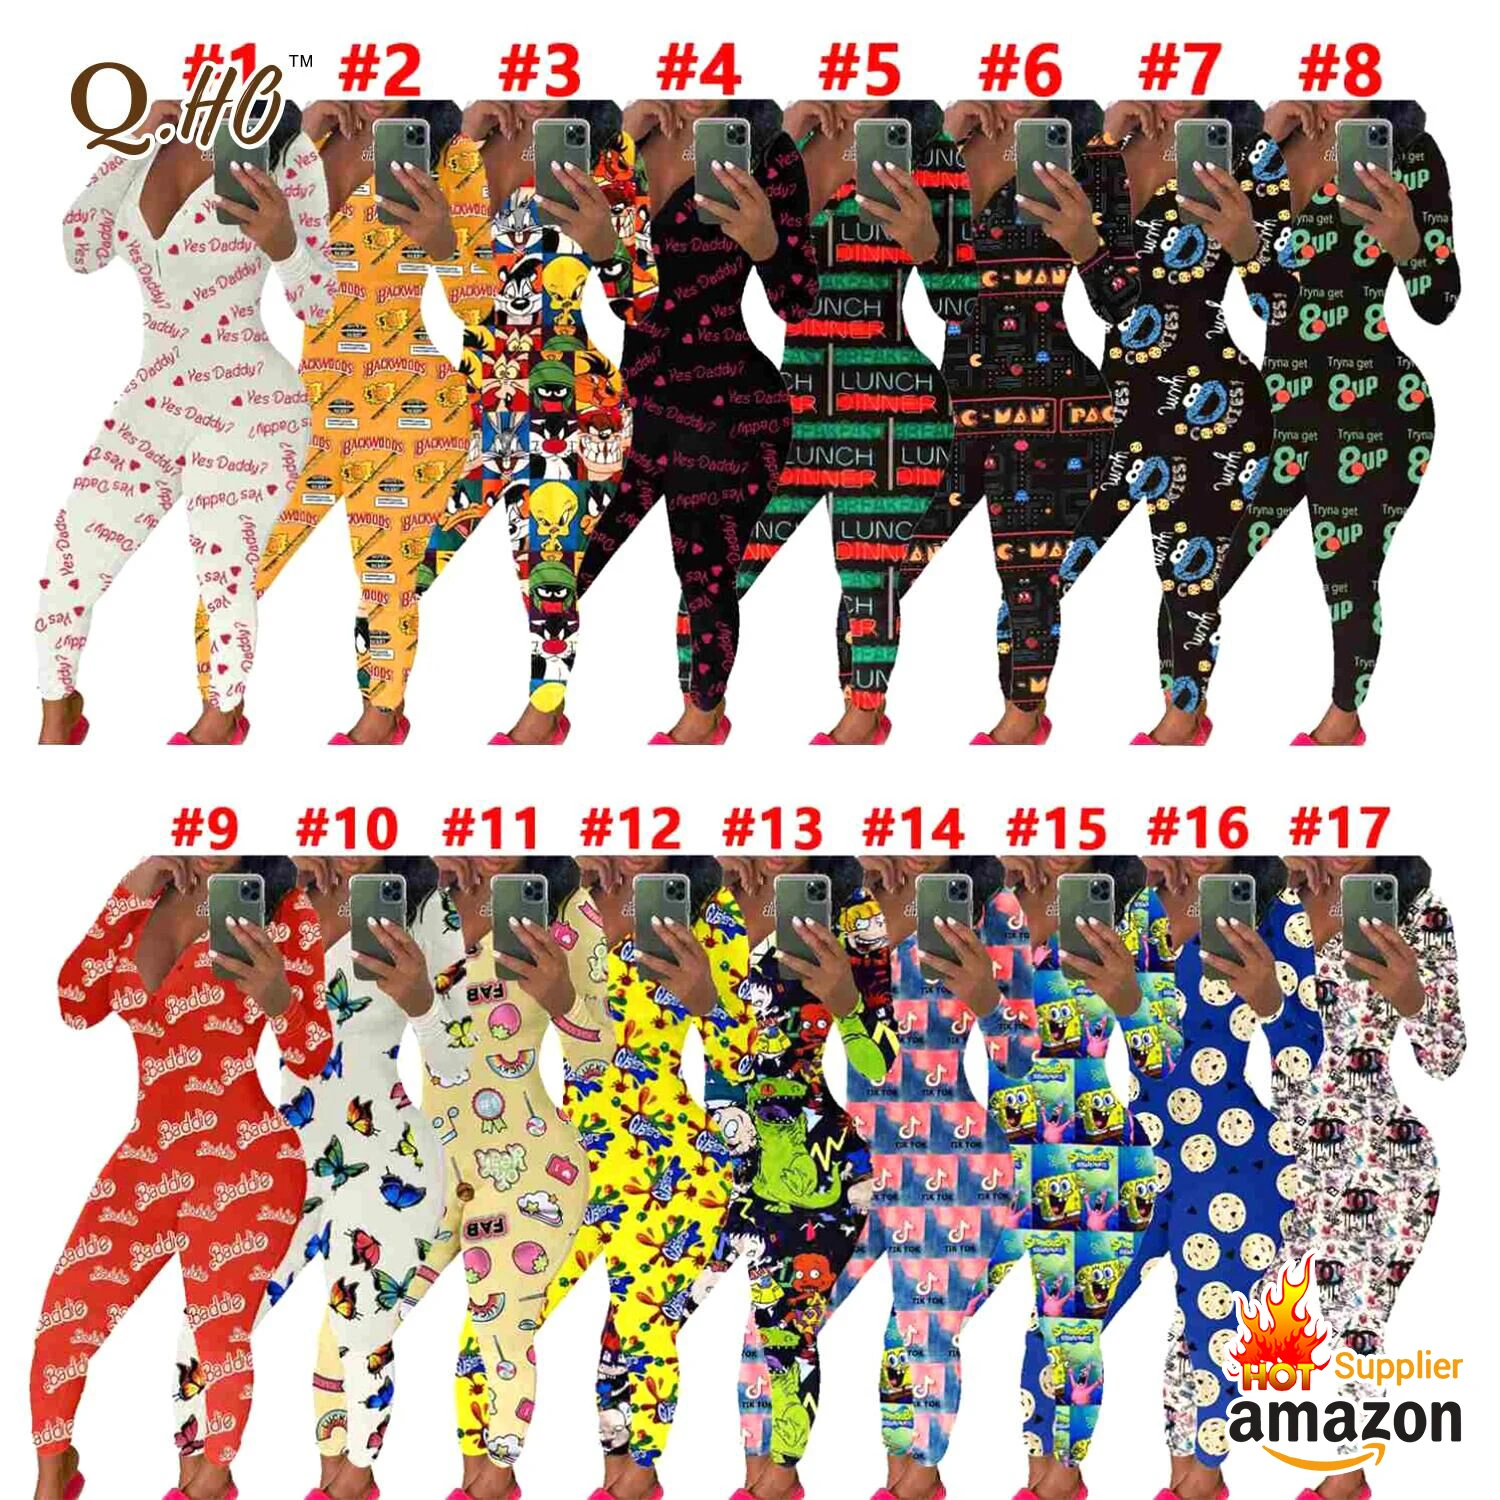 

New Arrival Character Onesie Nightwear pajamas onesie for adults Wap Long Pants Christmas Onesie Pajamas For Women, Picture shows